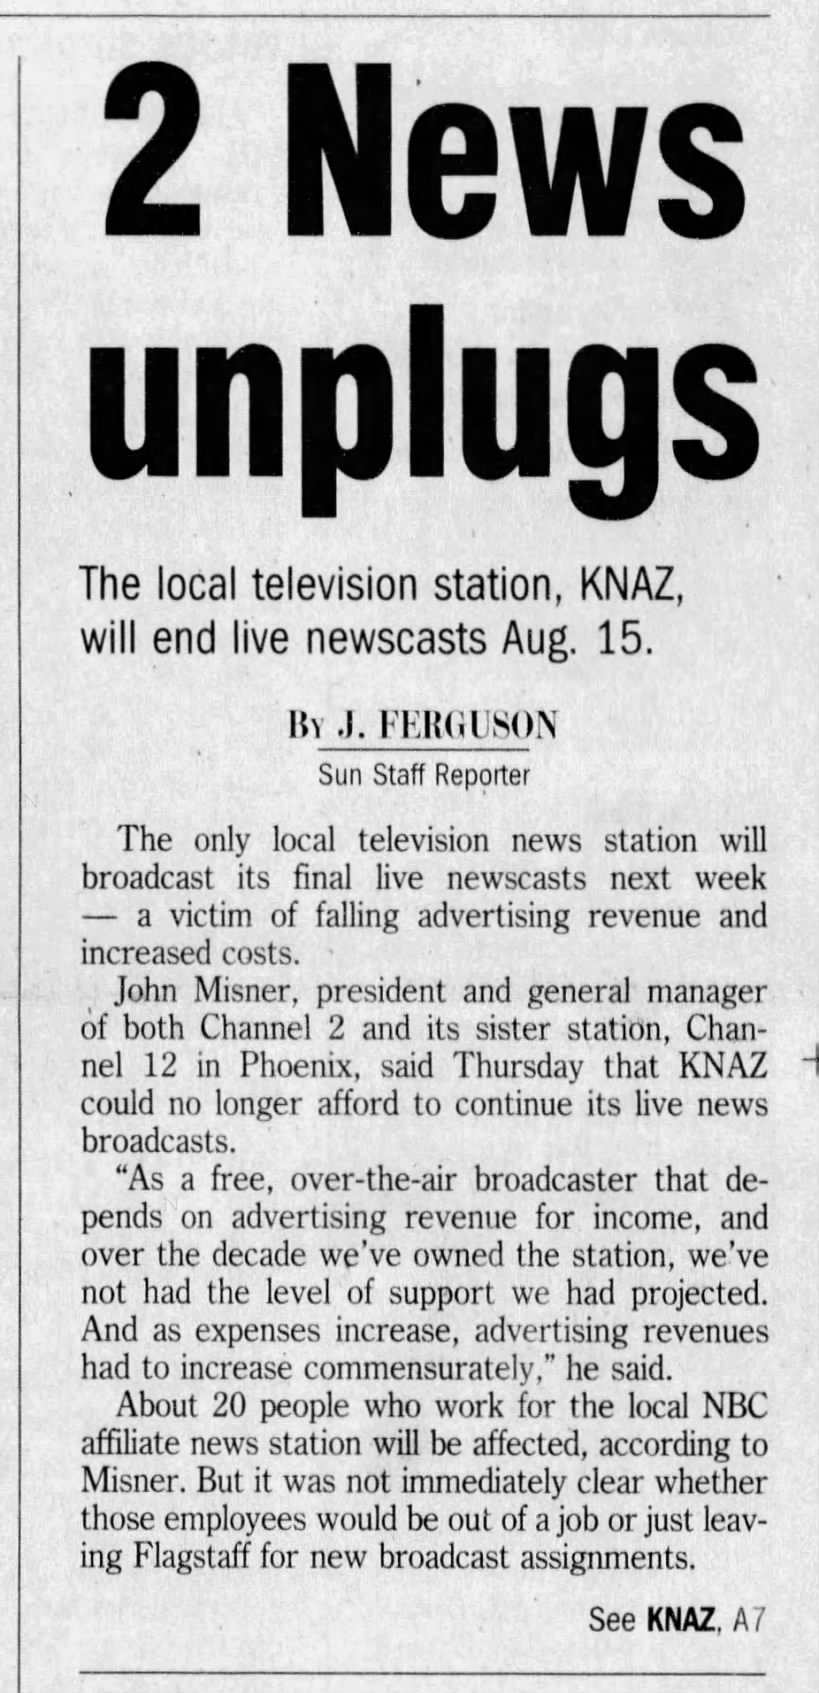 2 News unplugs: The local television station, KNAZ, will end live newscasts Aug. 15